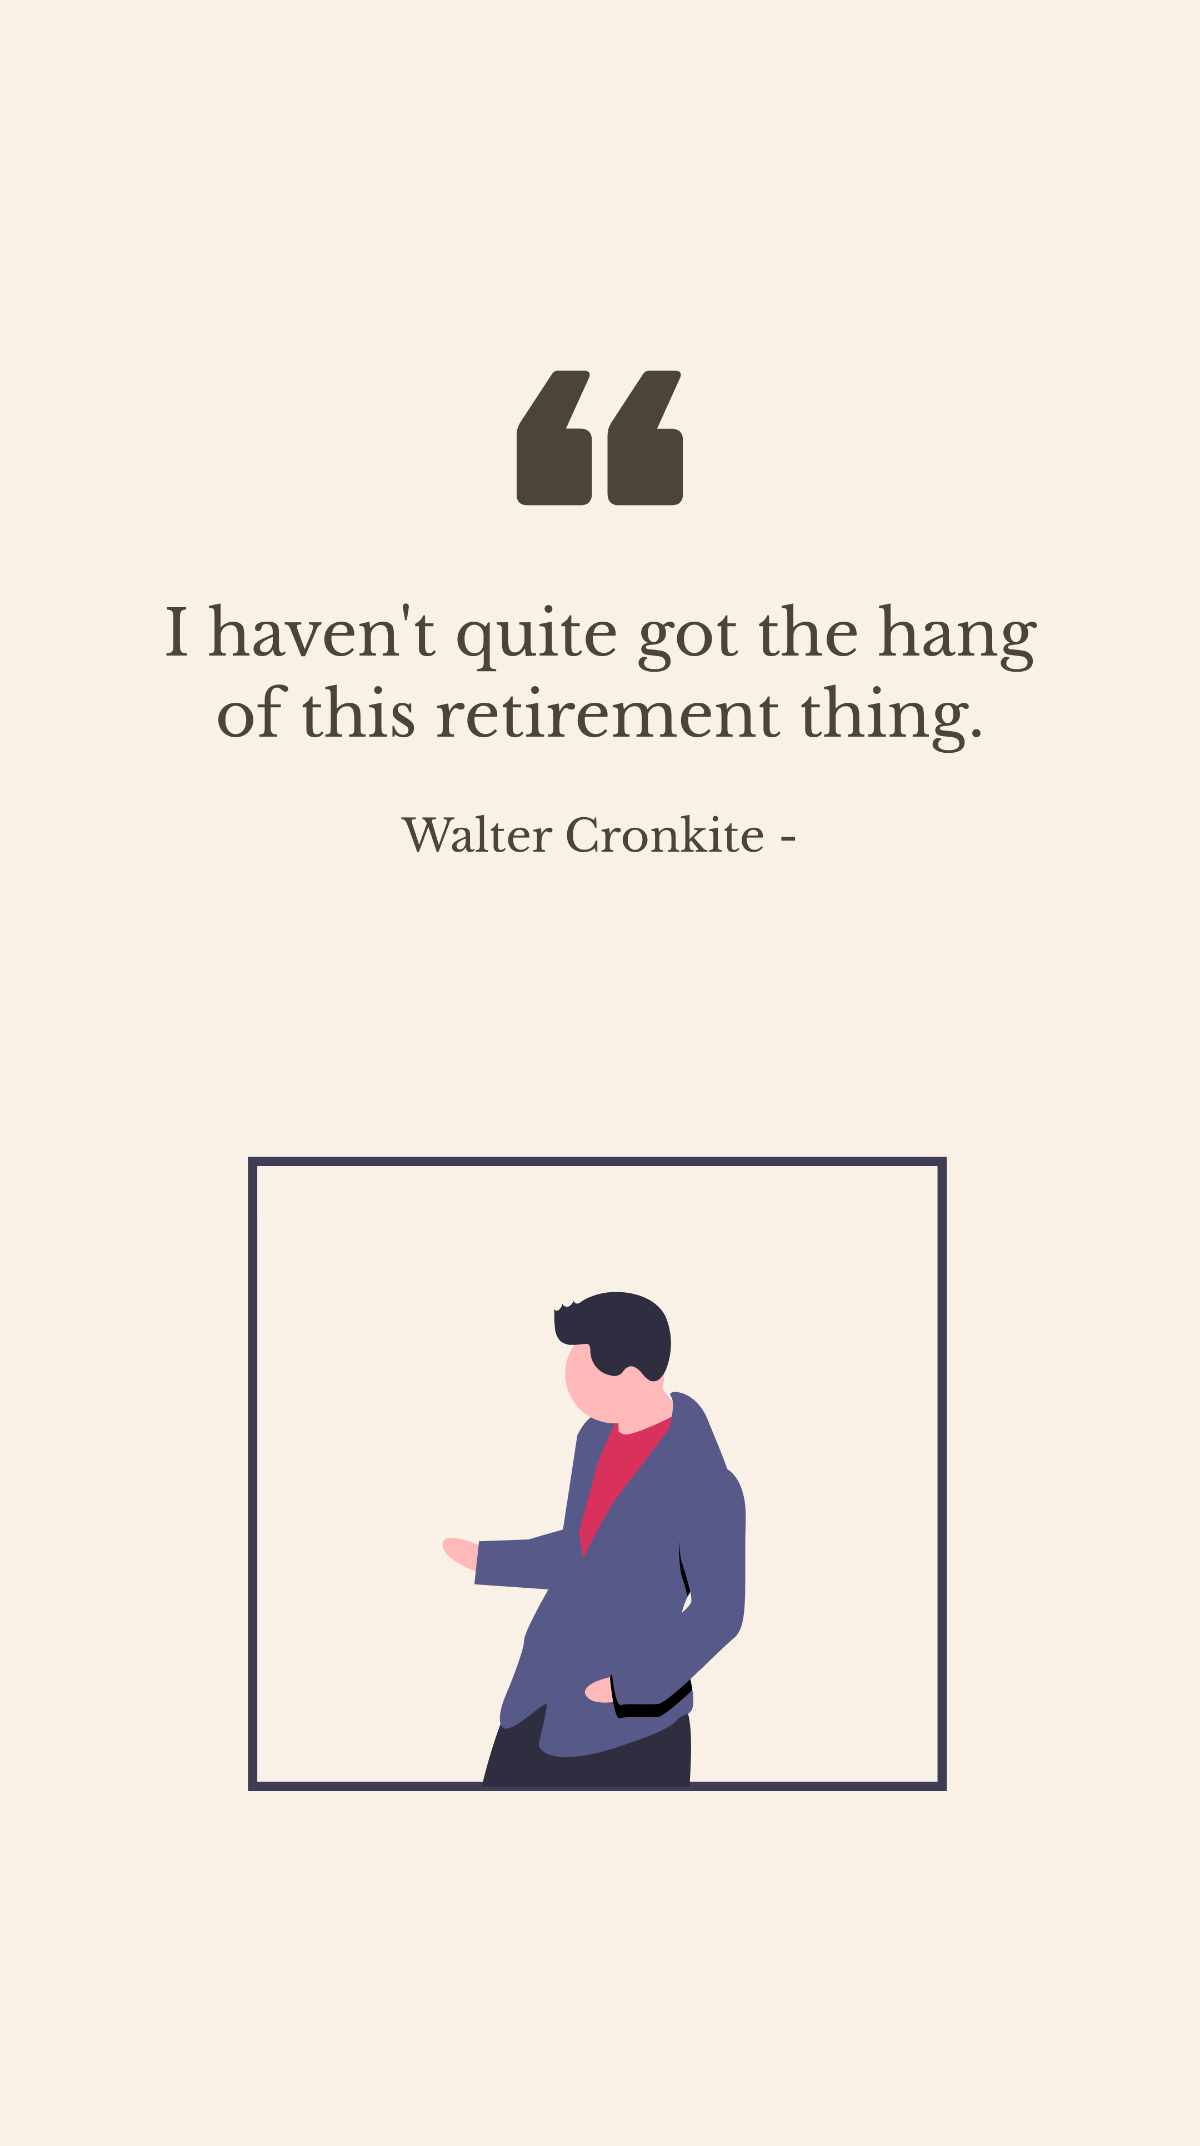 Walter Cronkite - I haven't quite got the hang of this retirement thing. Template